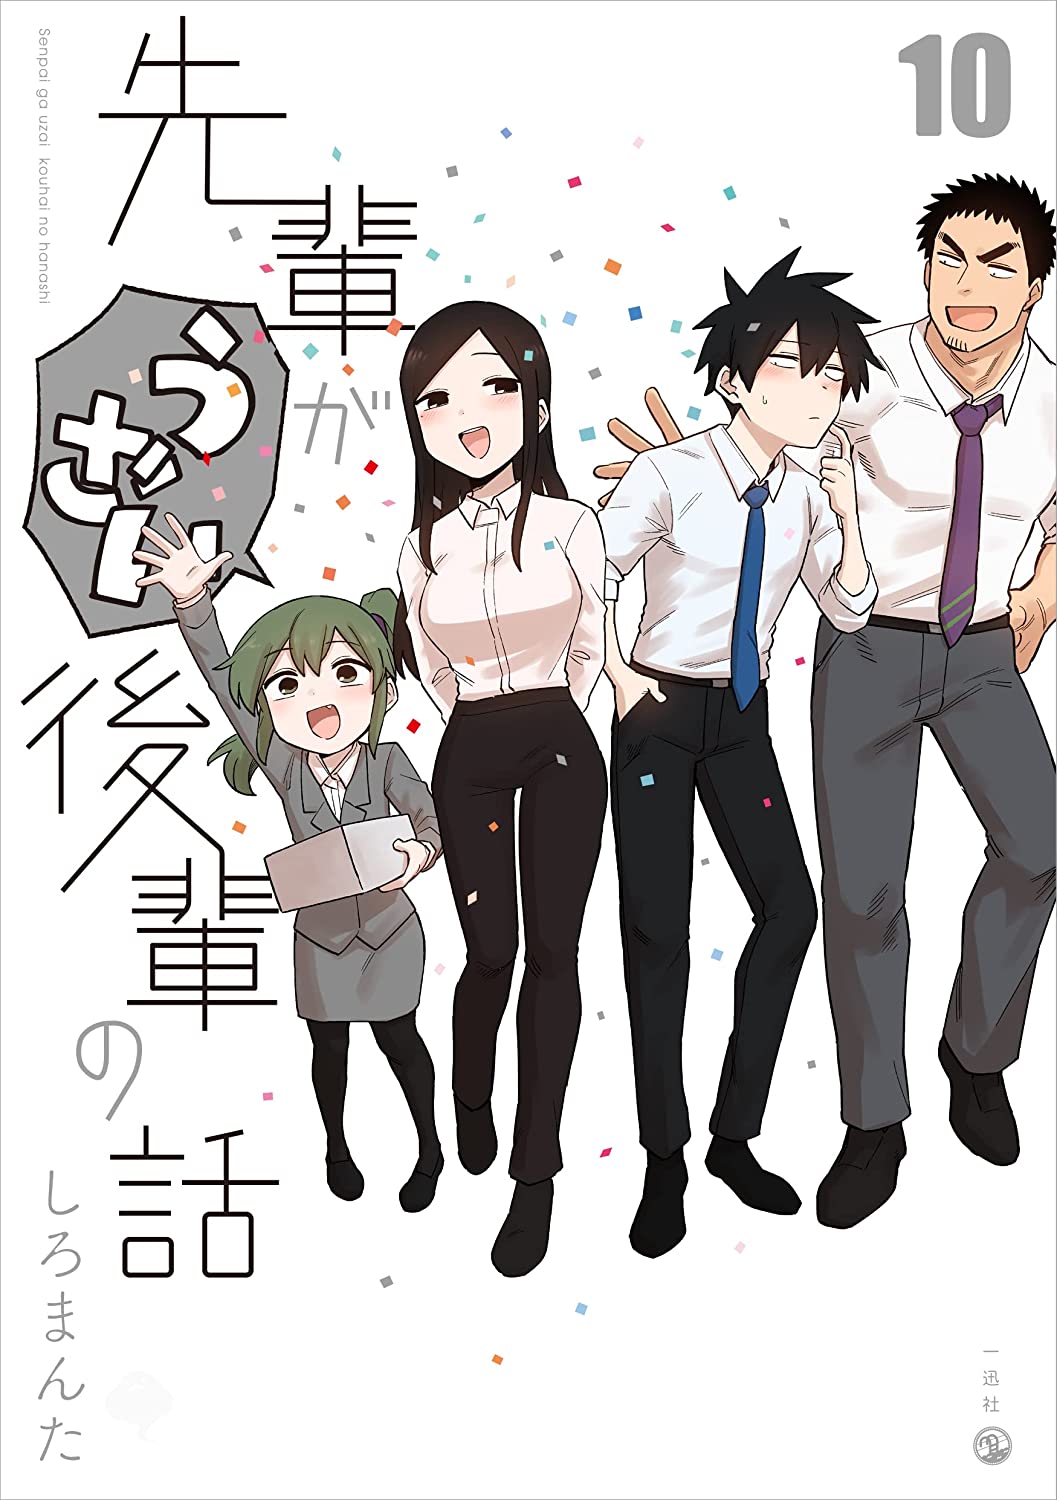 “My Senpai is Annoying” by Shiromanta will end with the next volume 13!